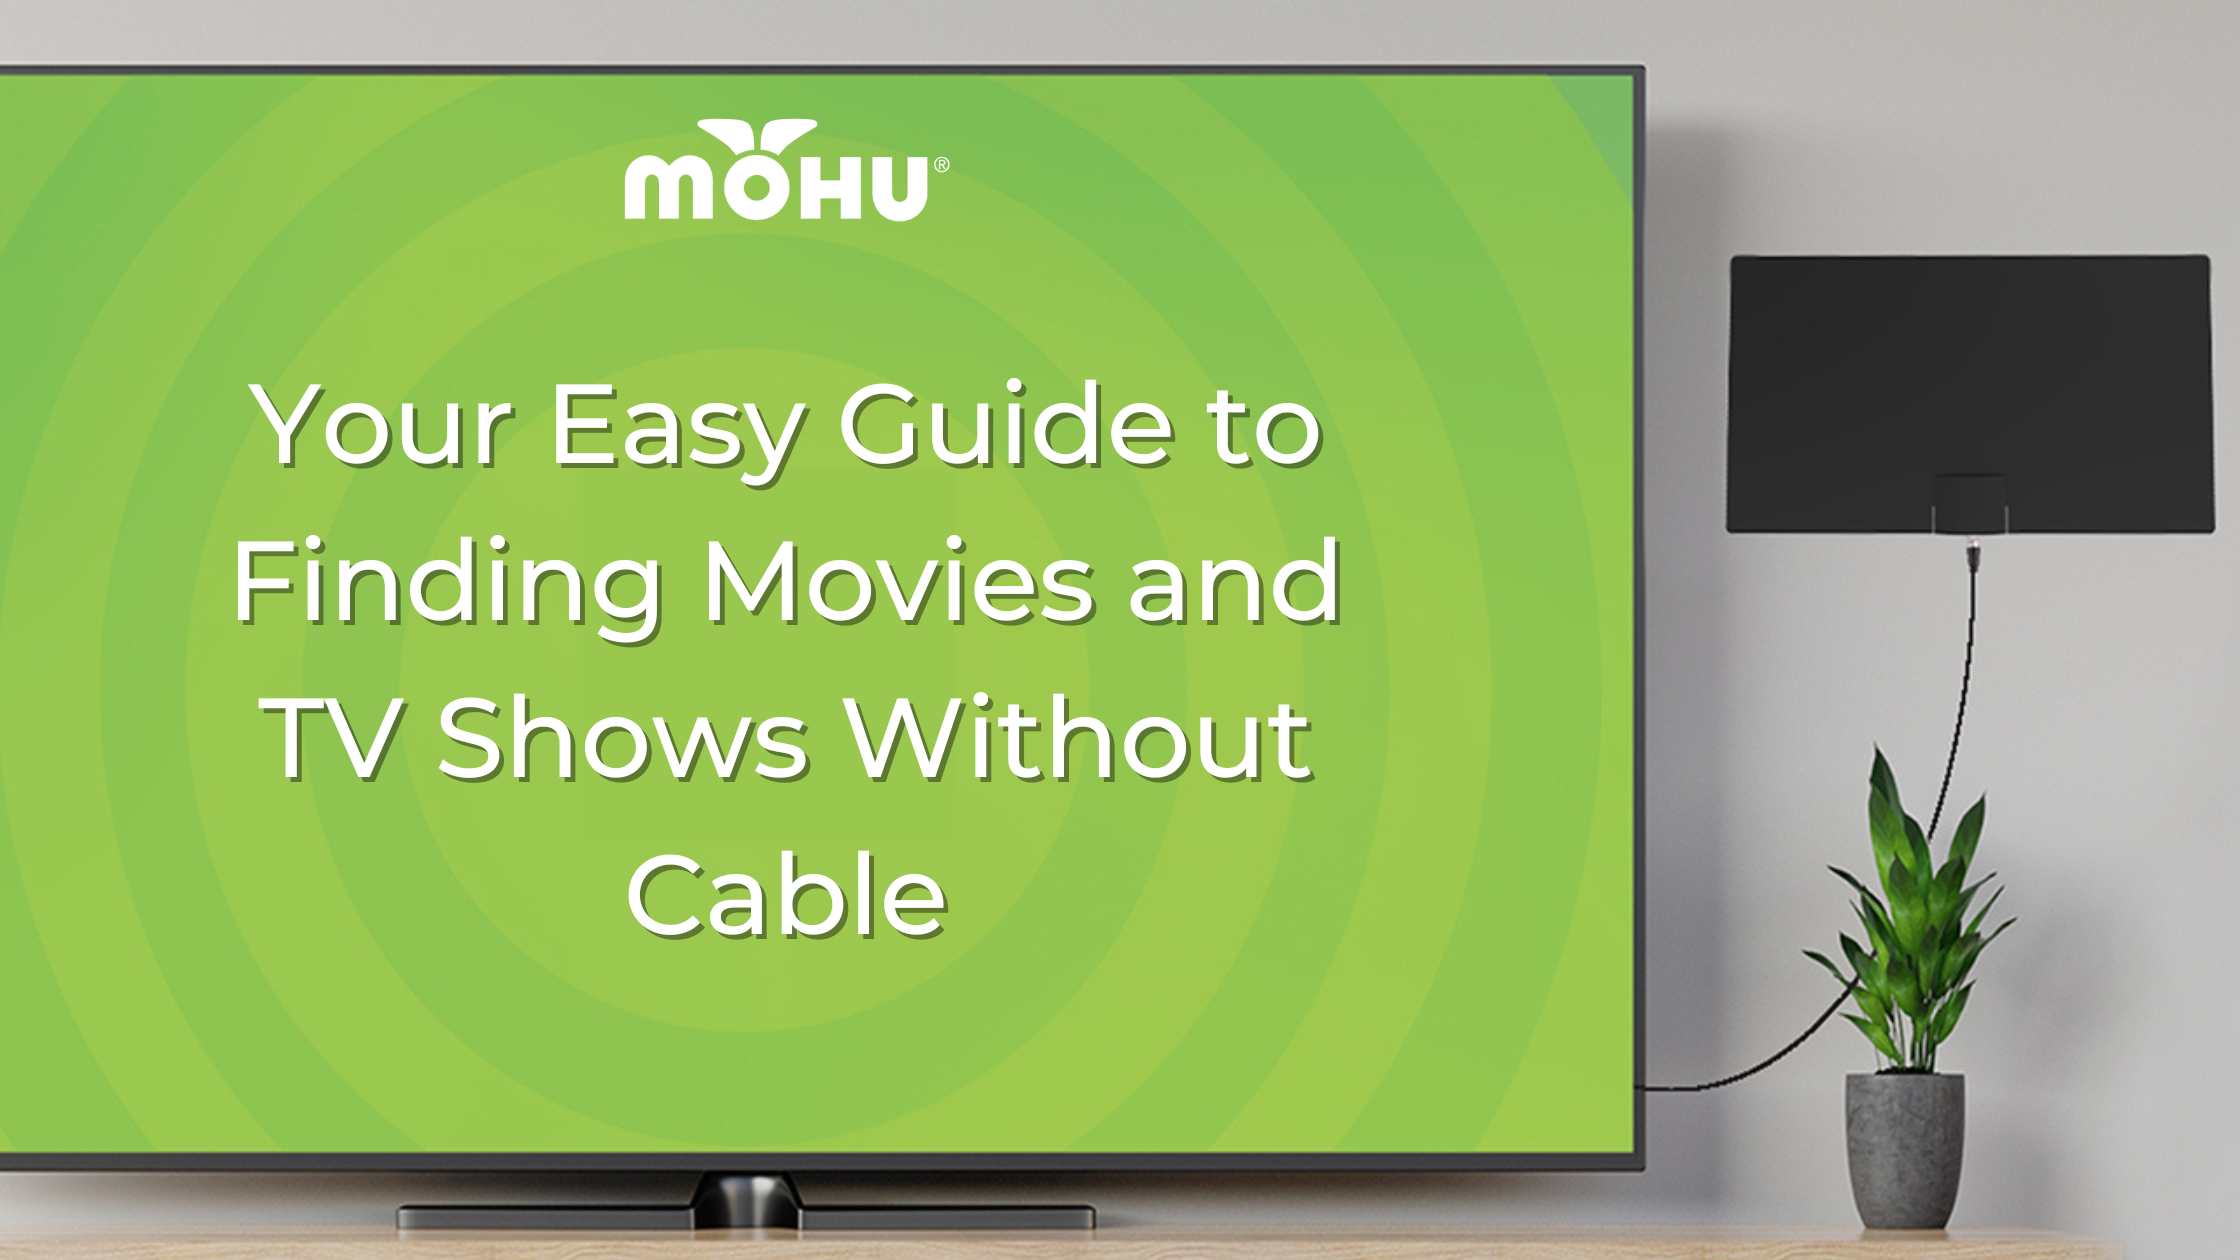 Your Easy Guide to Finding Movies and TV Shows Without Cable